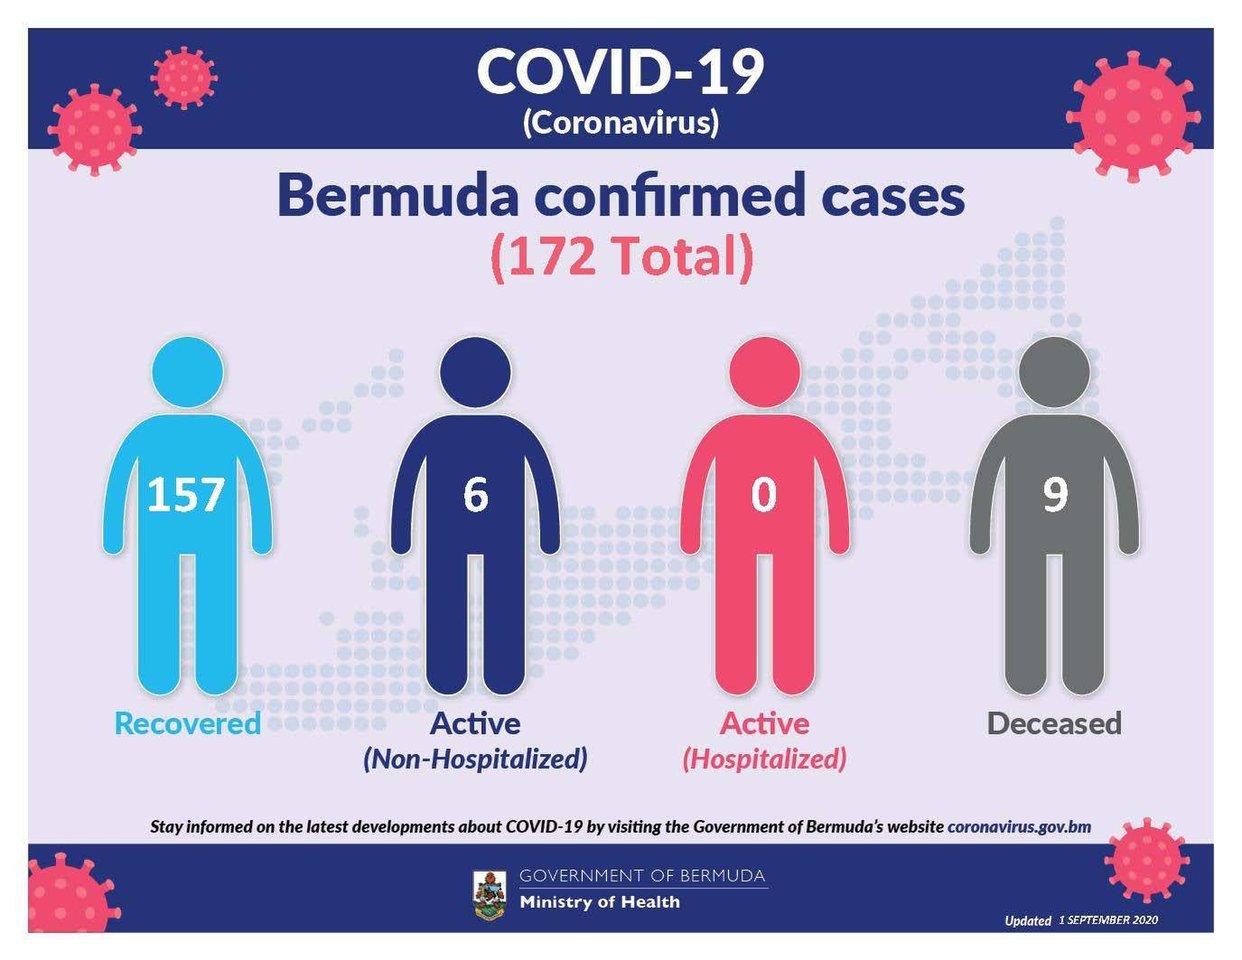 No new COVID-19 cases reported in Bermuda, 2 September